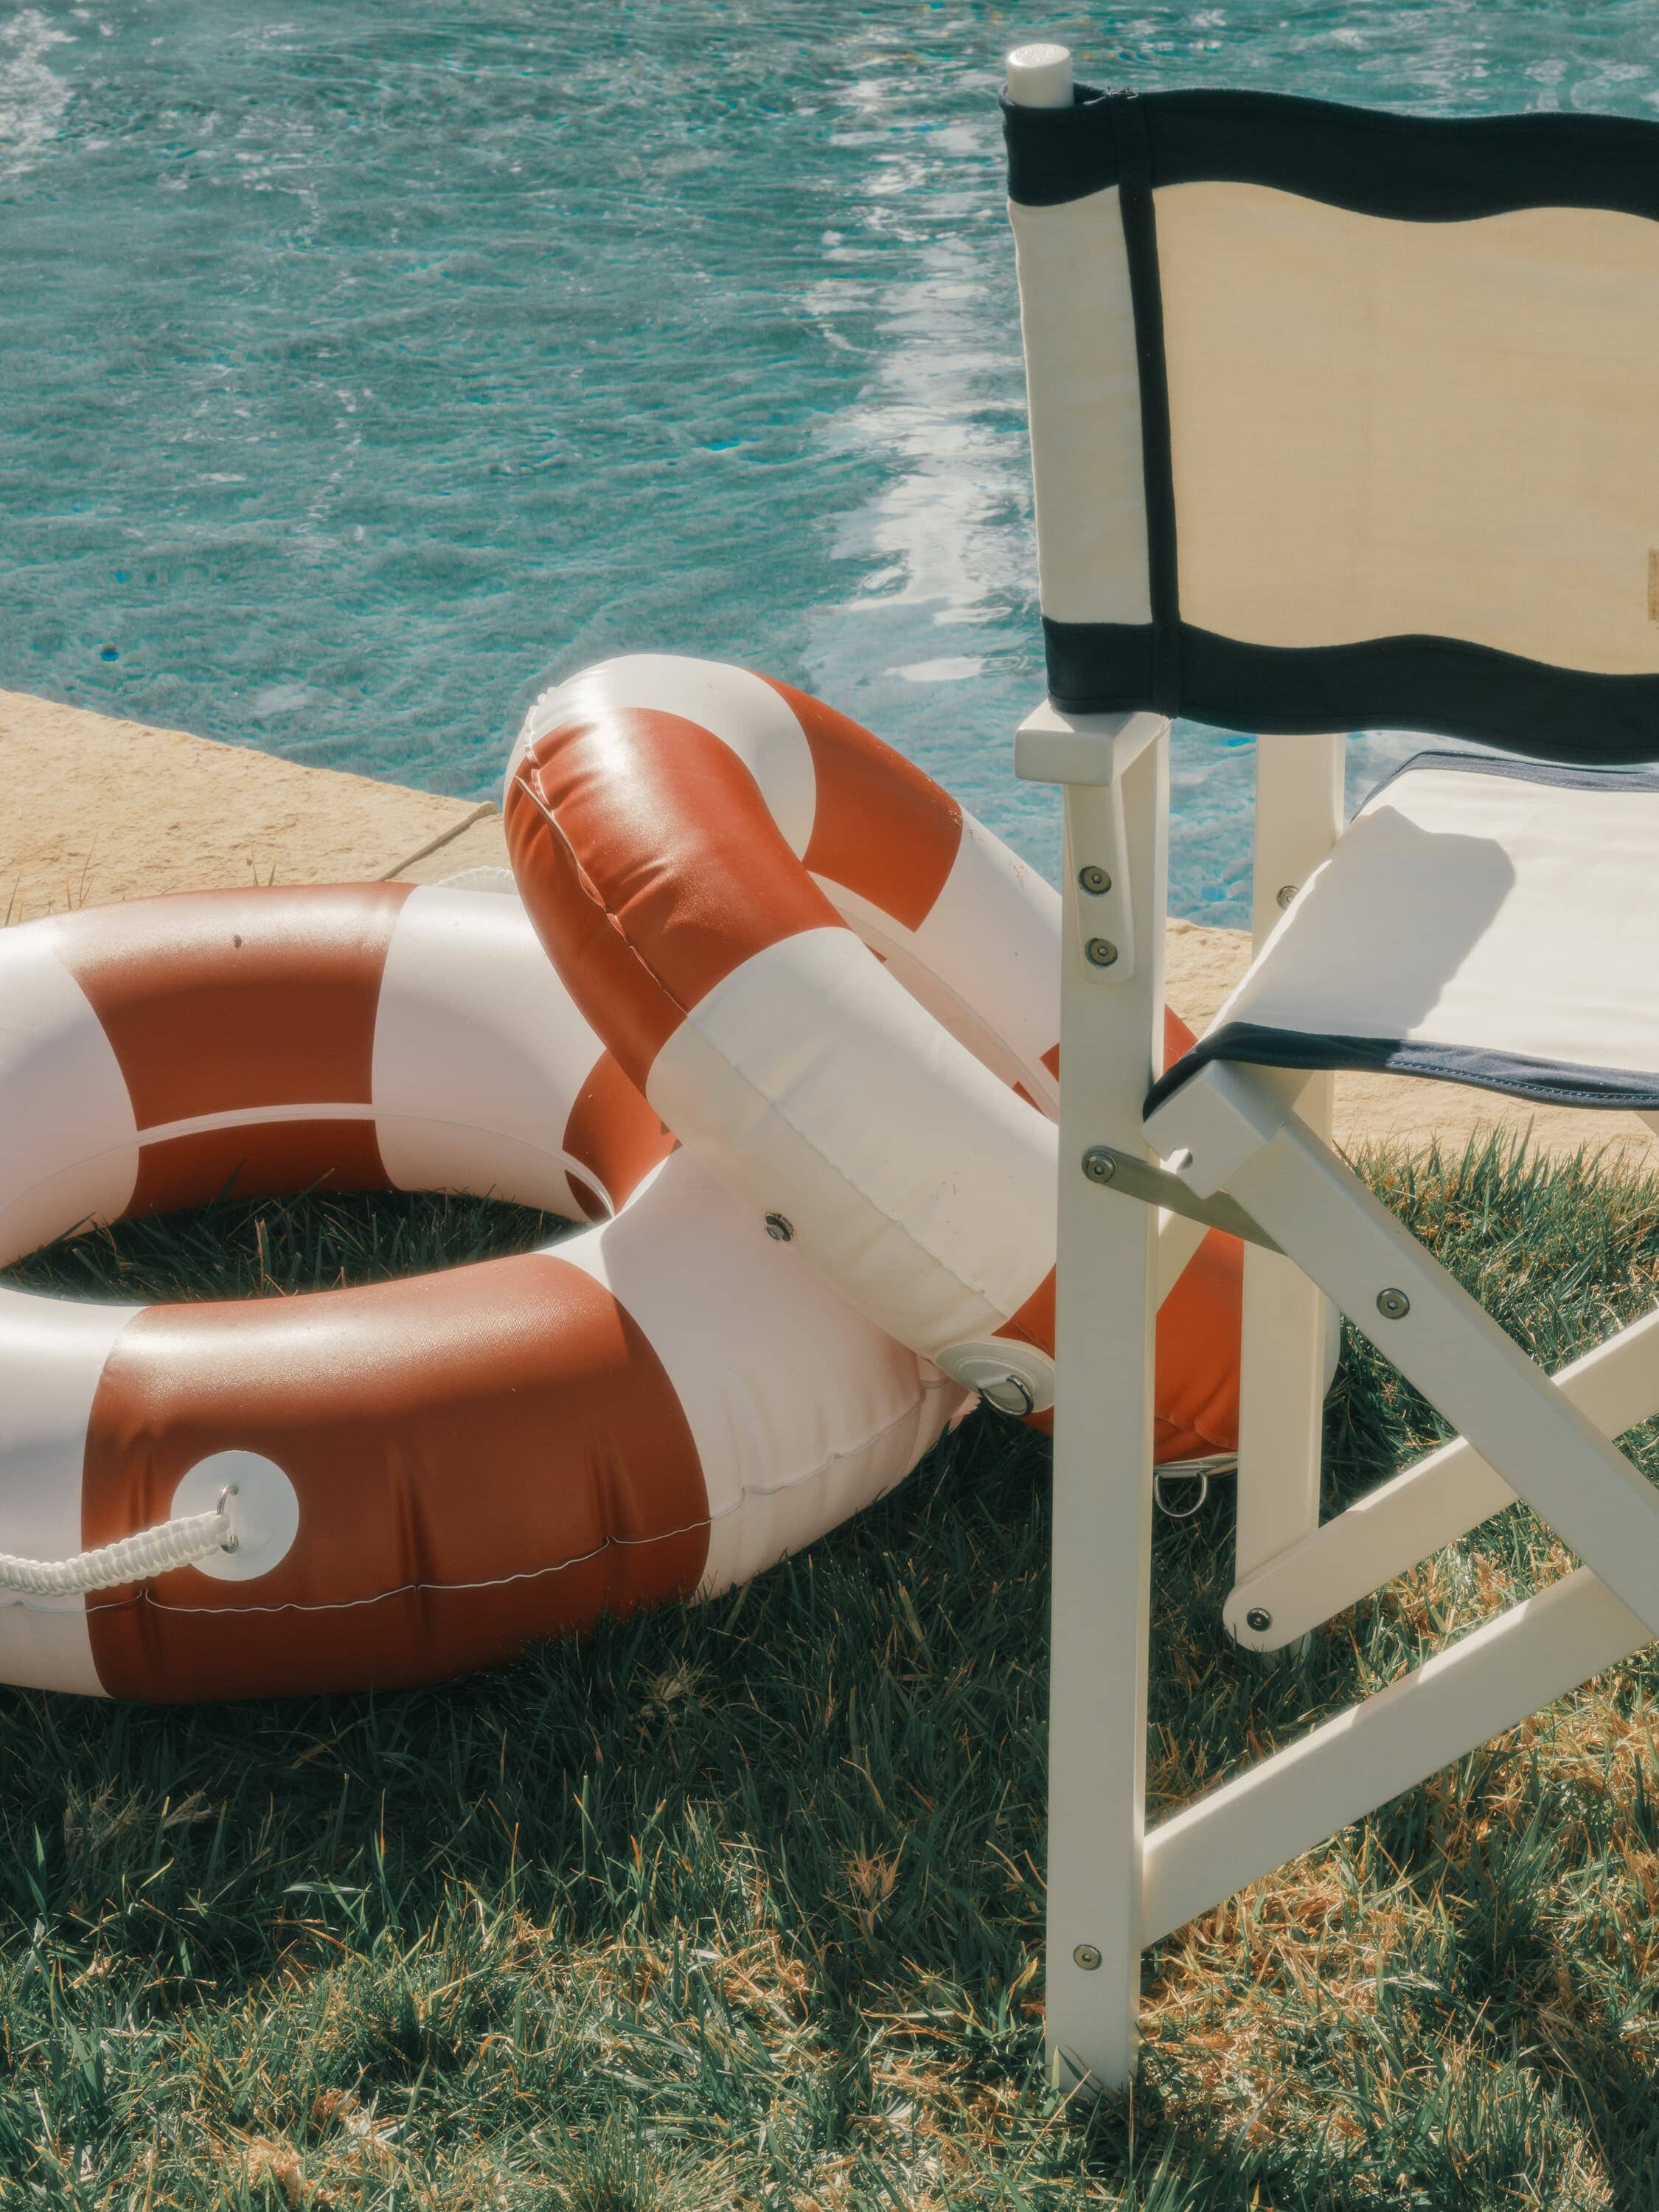 Pool floats leaning against chair